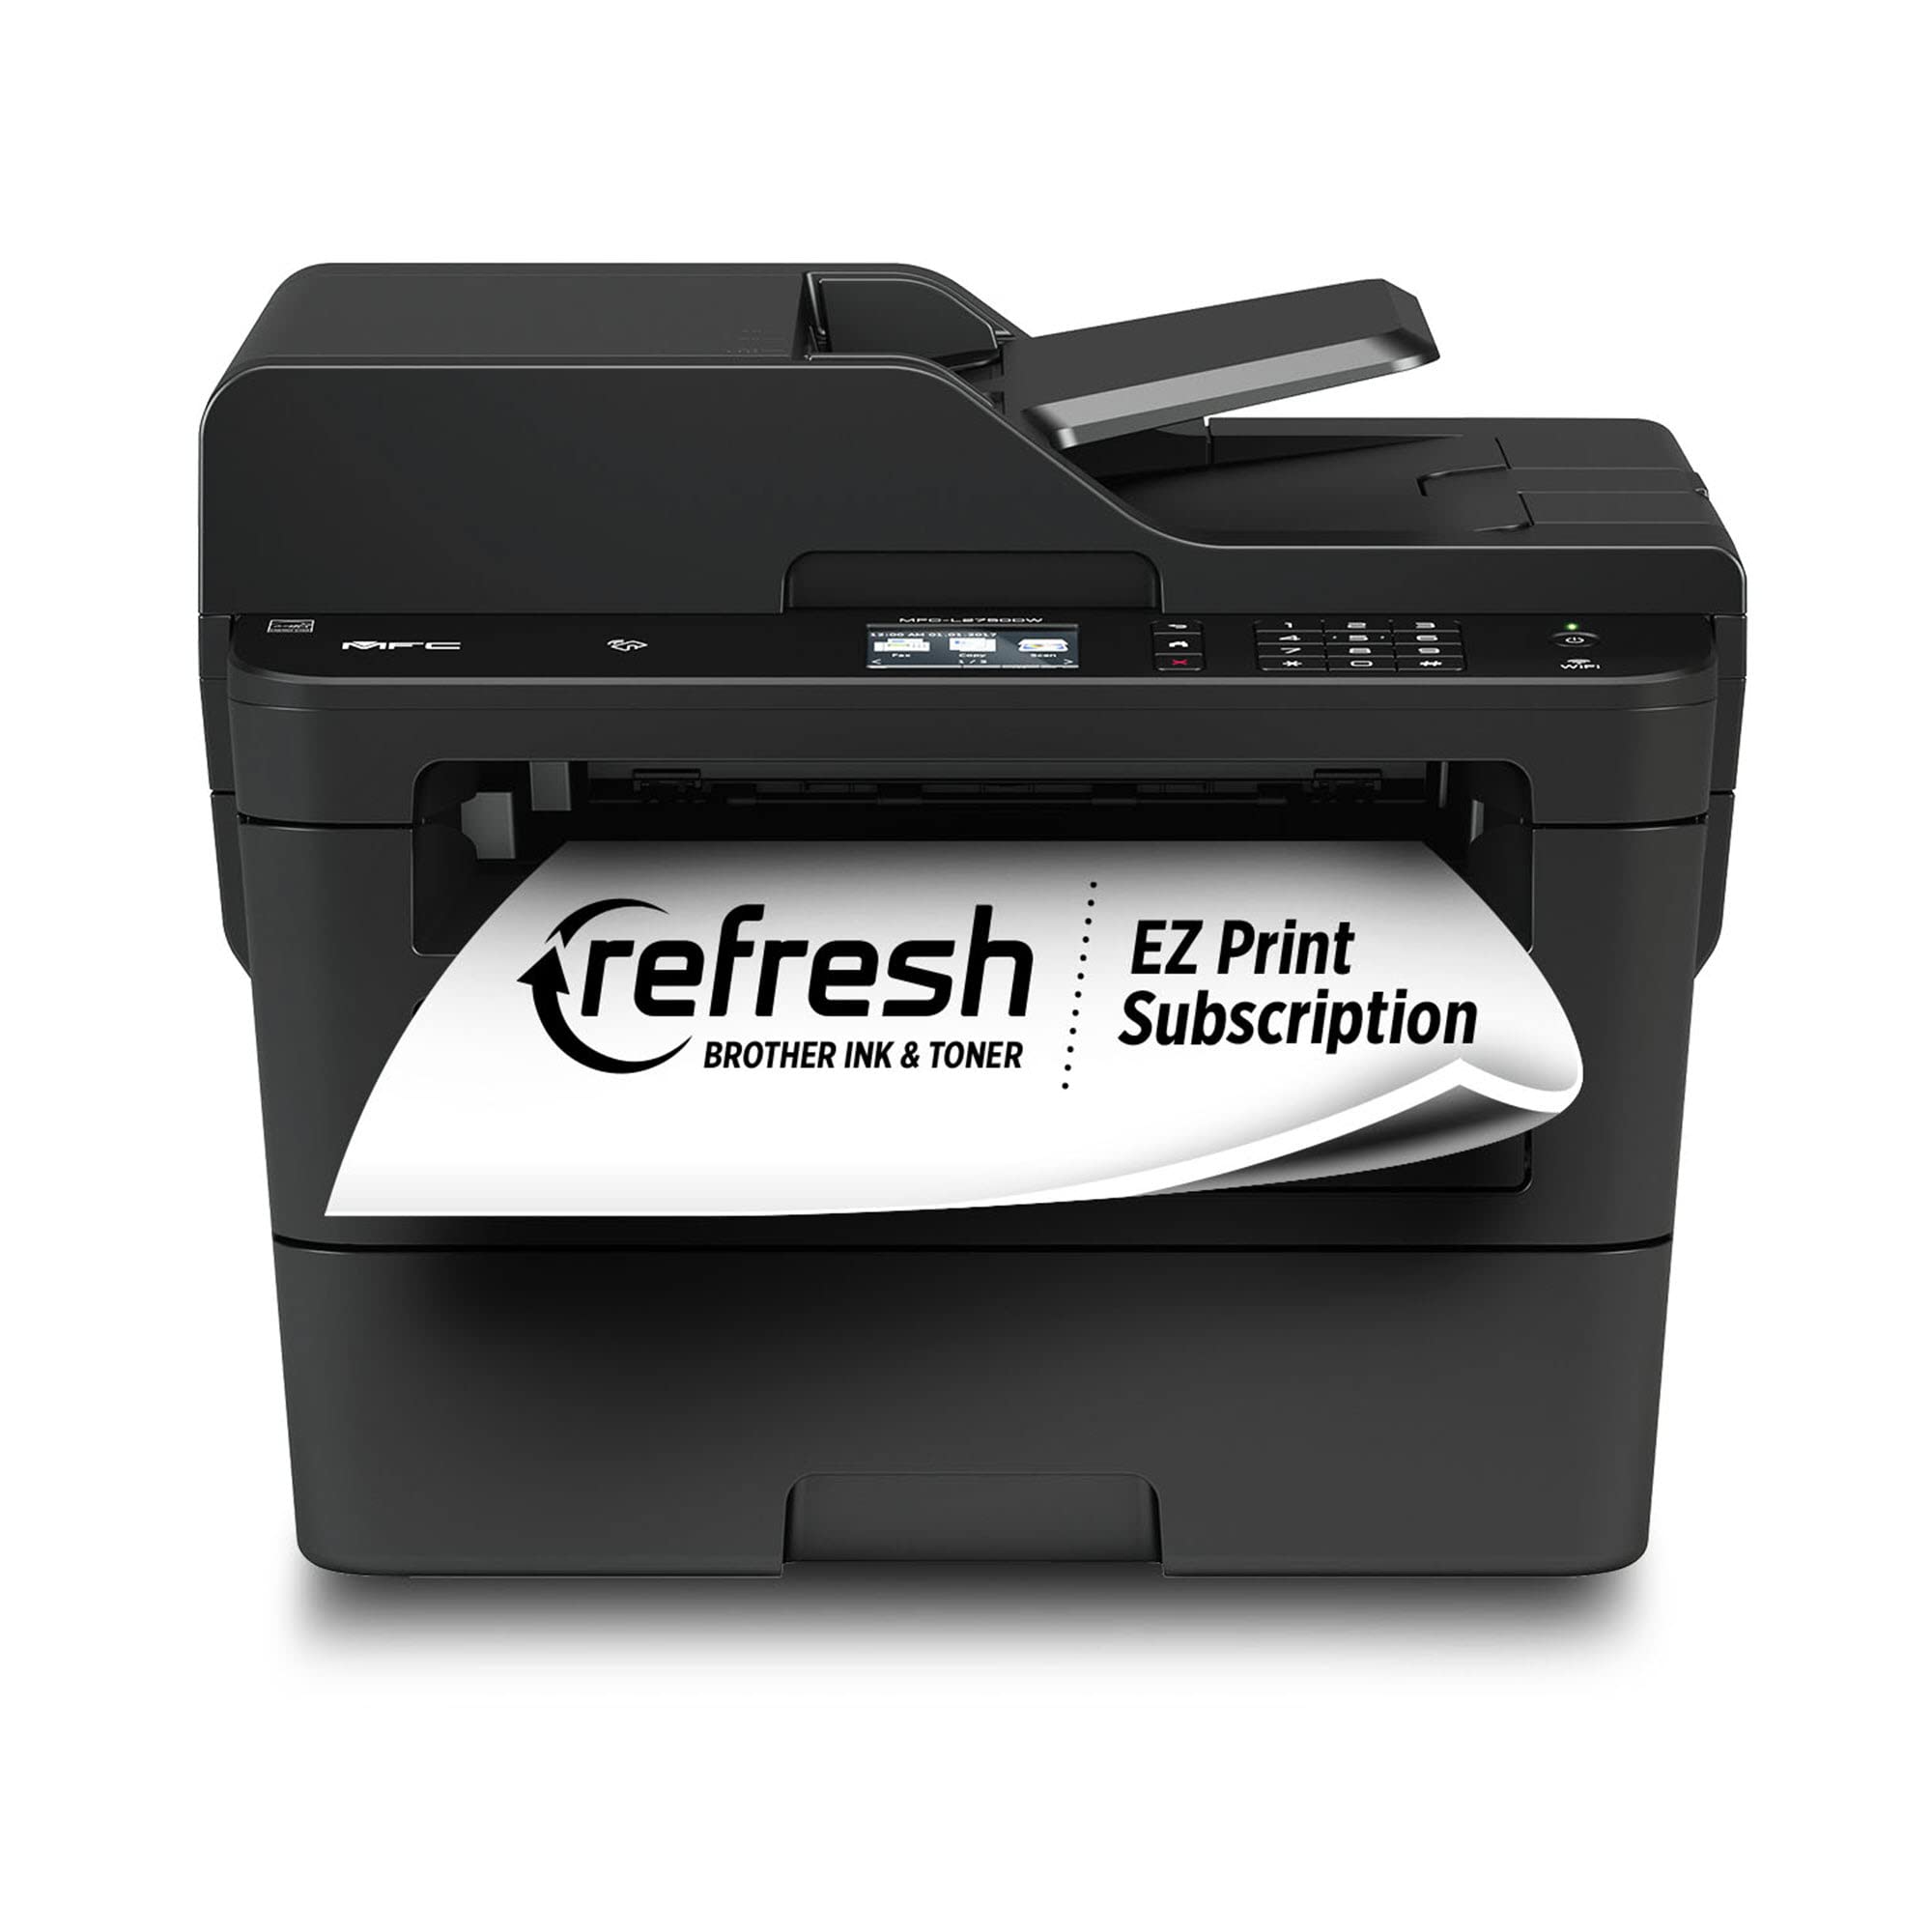 Brother MFCL2750DW Monochrome All-in-One Wireless Laser Printer, Duplex Copy & Scan, Includes 4 Month Refresh Subscription Trial and Amazon Dash Replenishment Ready